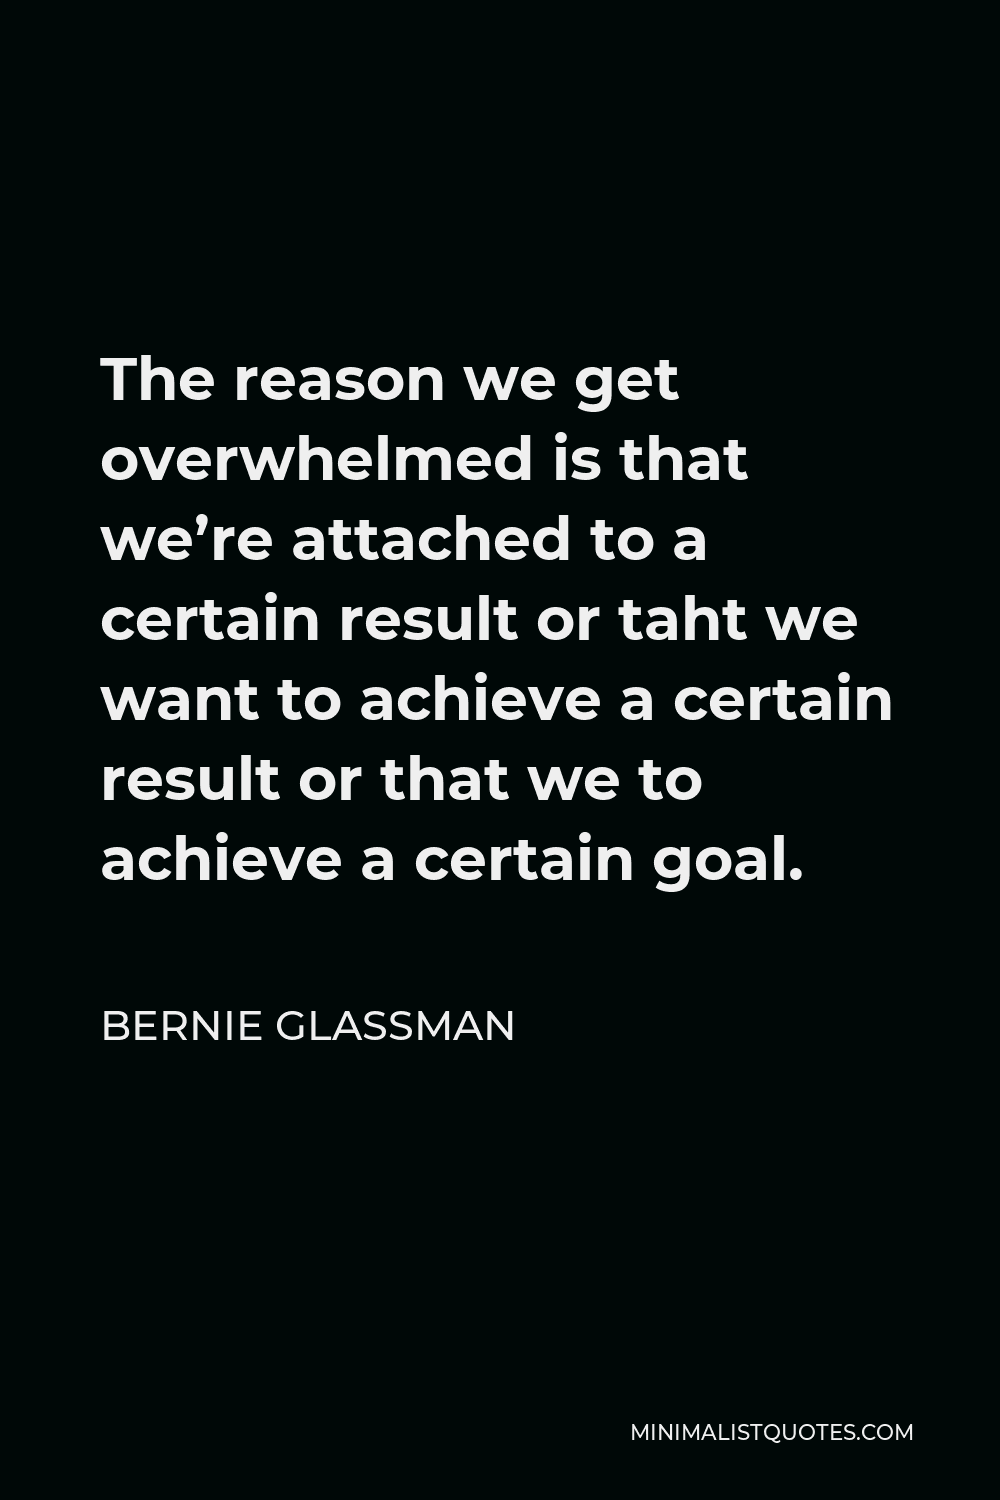 Bernie Glassman Quote - The reason we get overwhelmed is that we’re attached to a certain result or taht we want to achieve a certain result or that we to achieve a certain goal.